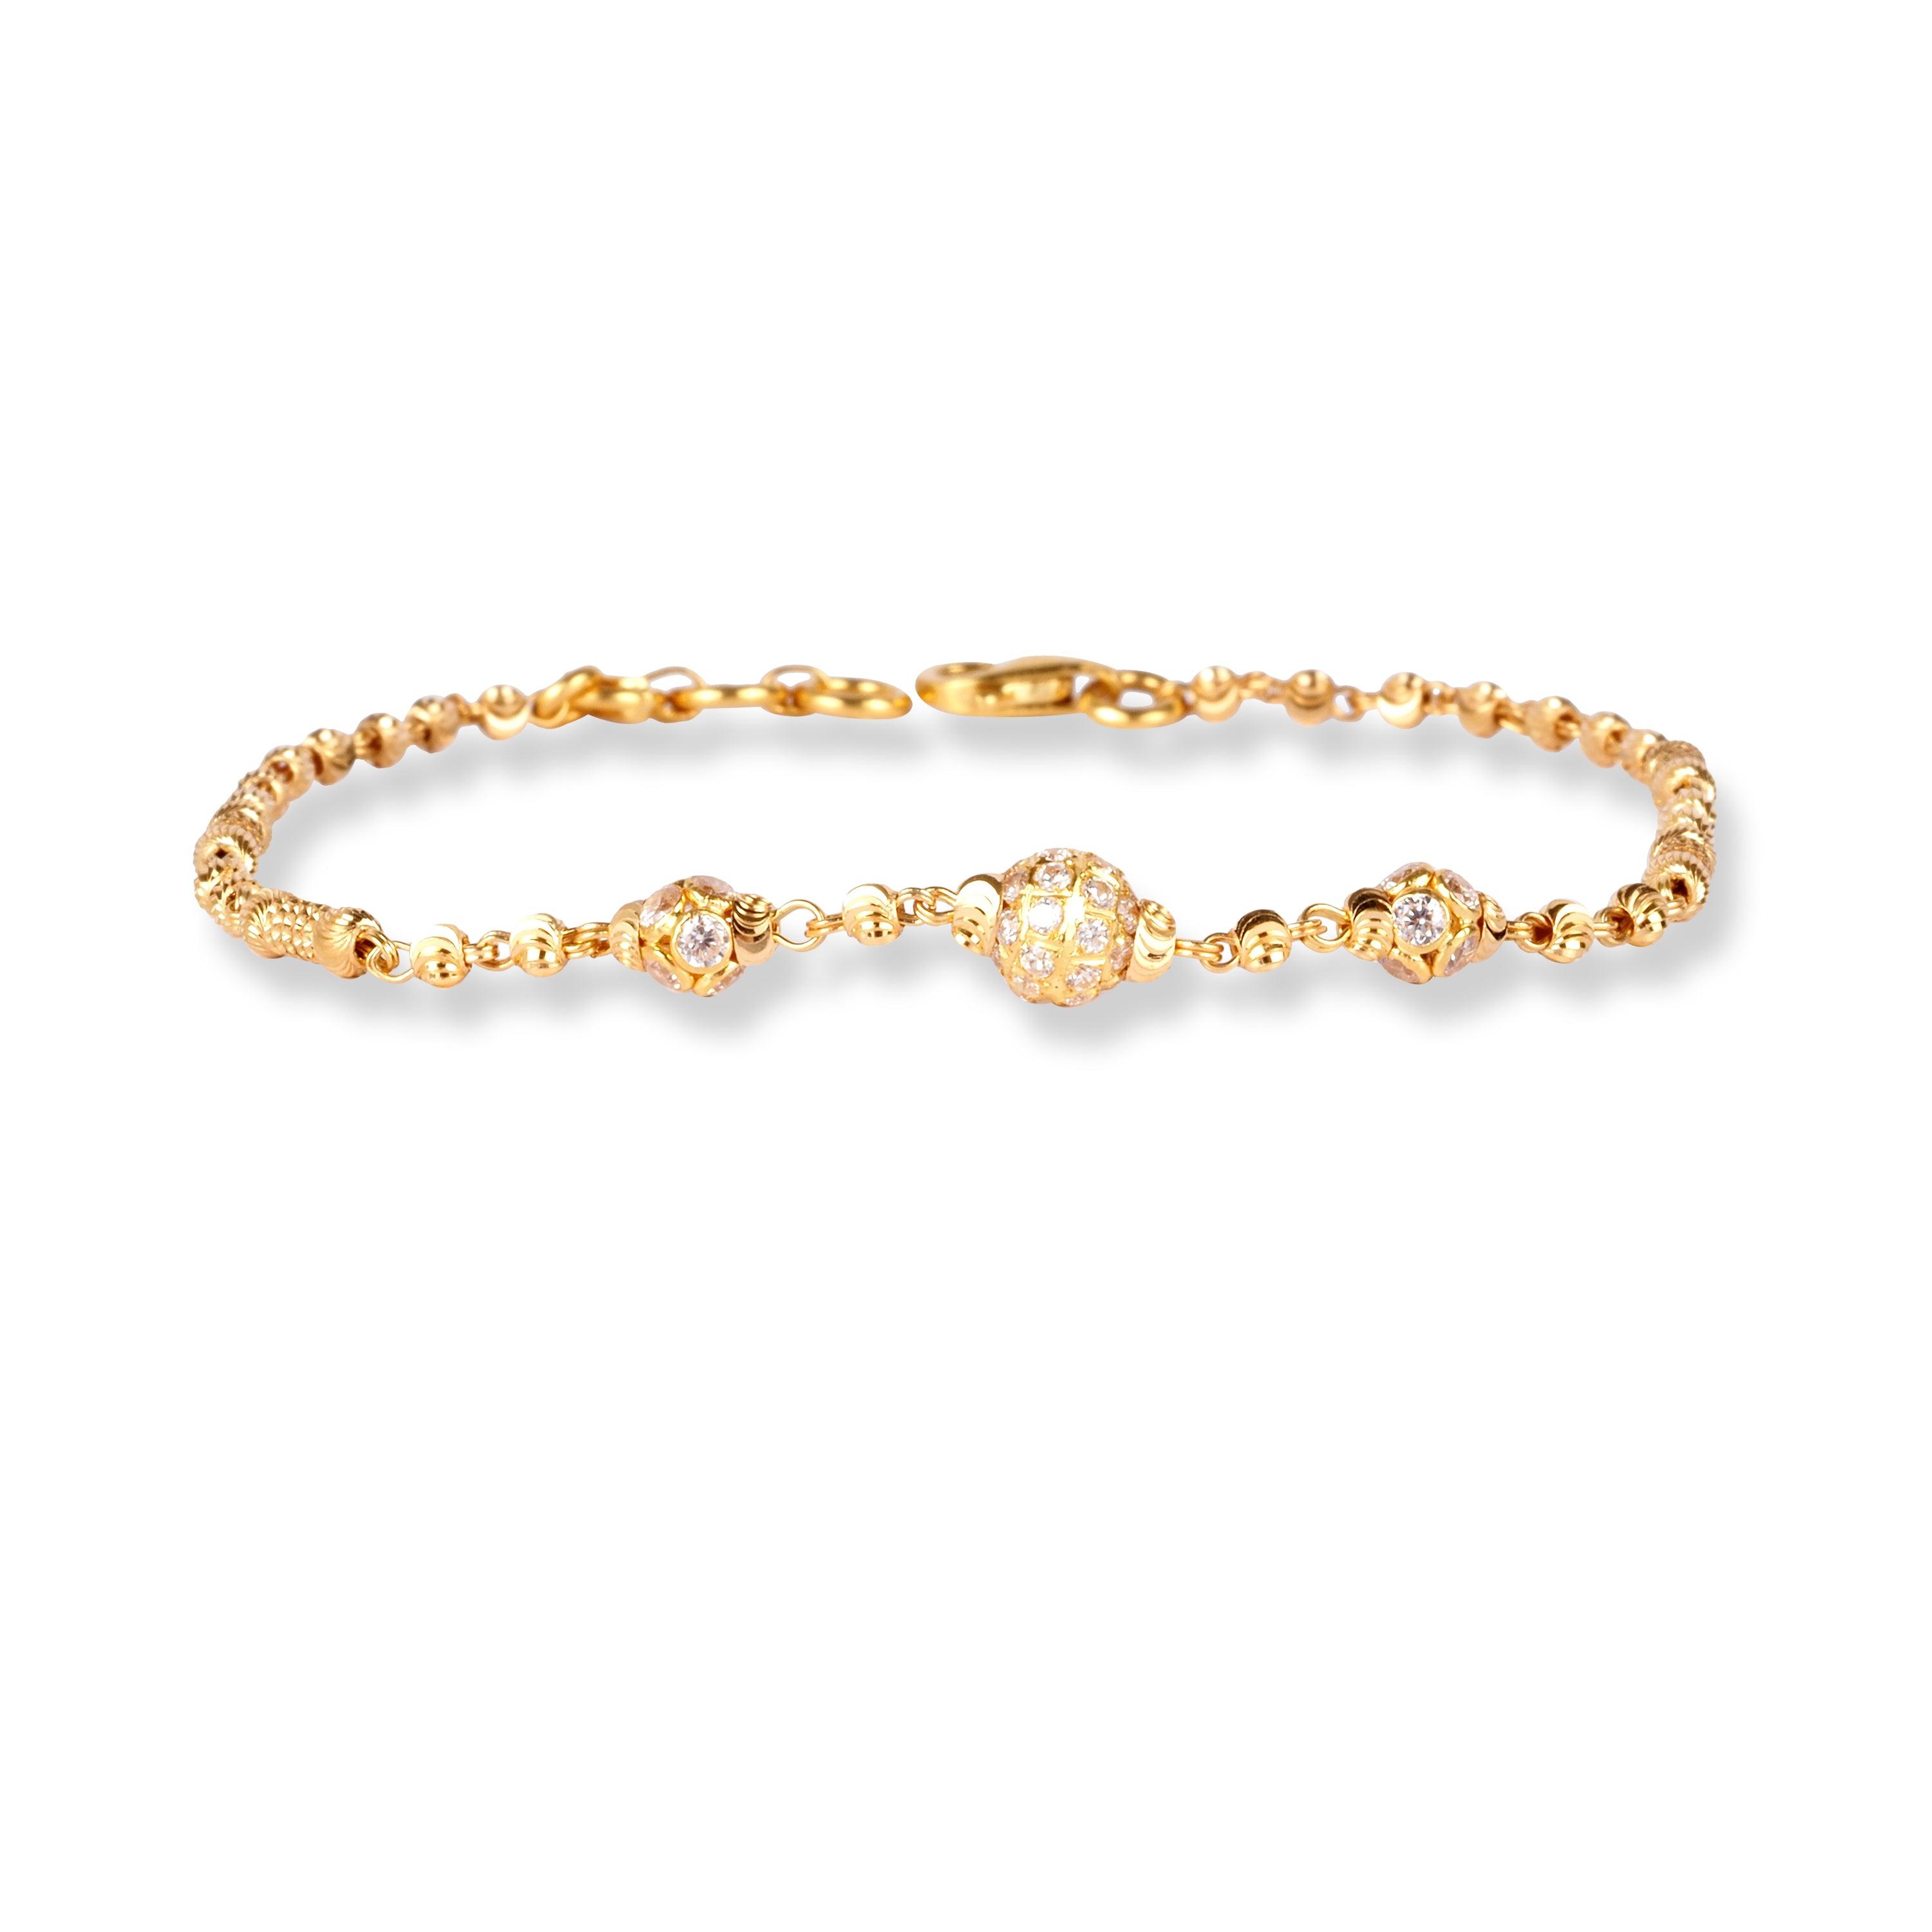 22ct Gold Bracelet with Diamond Cut Beads and Cubic Zirconia Stones LBR-7131 - Minar Jewellers